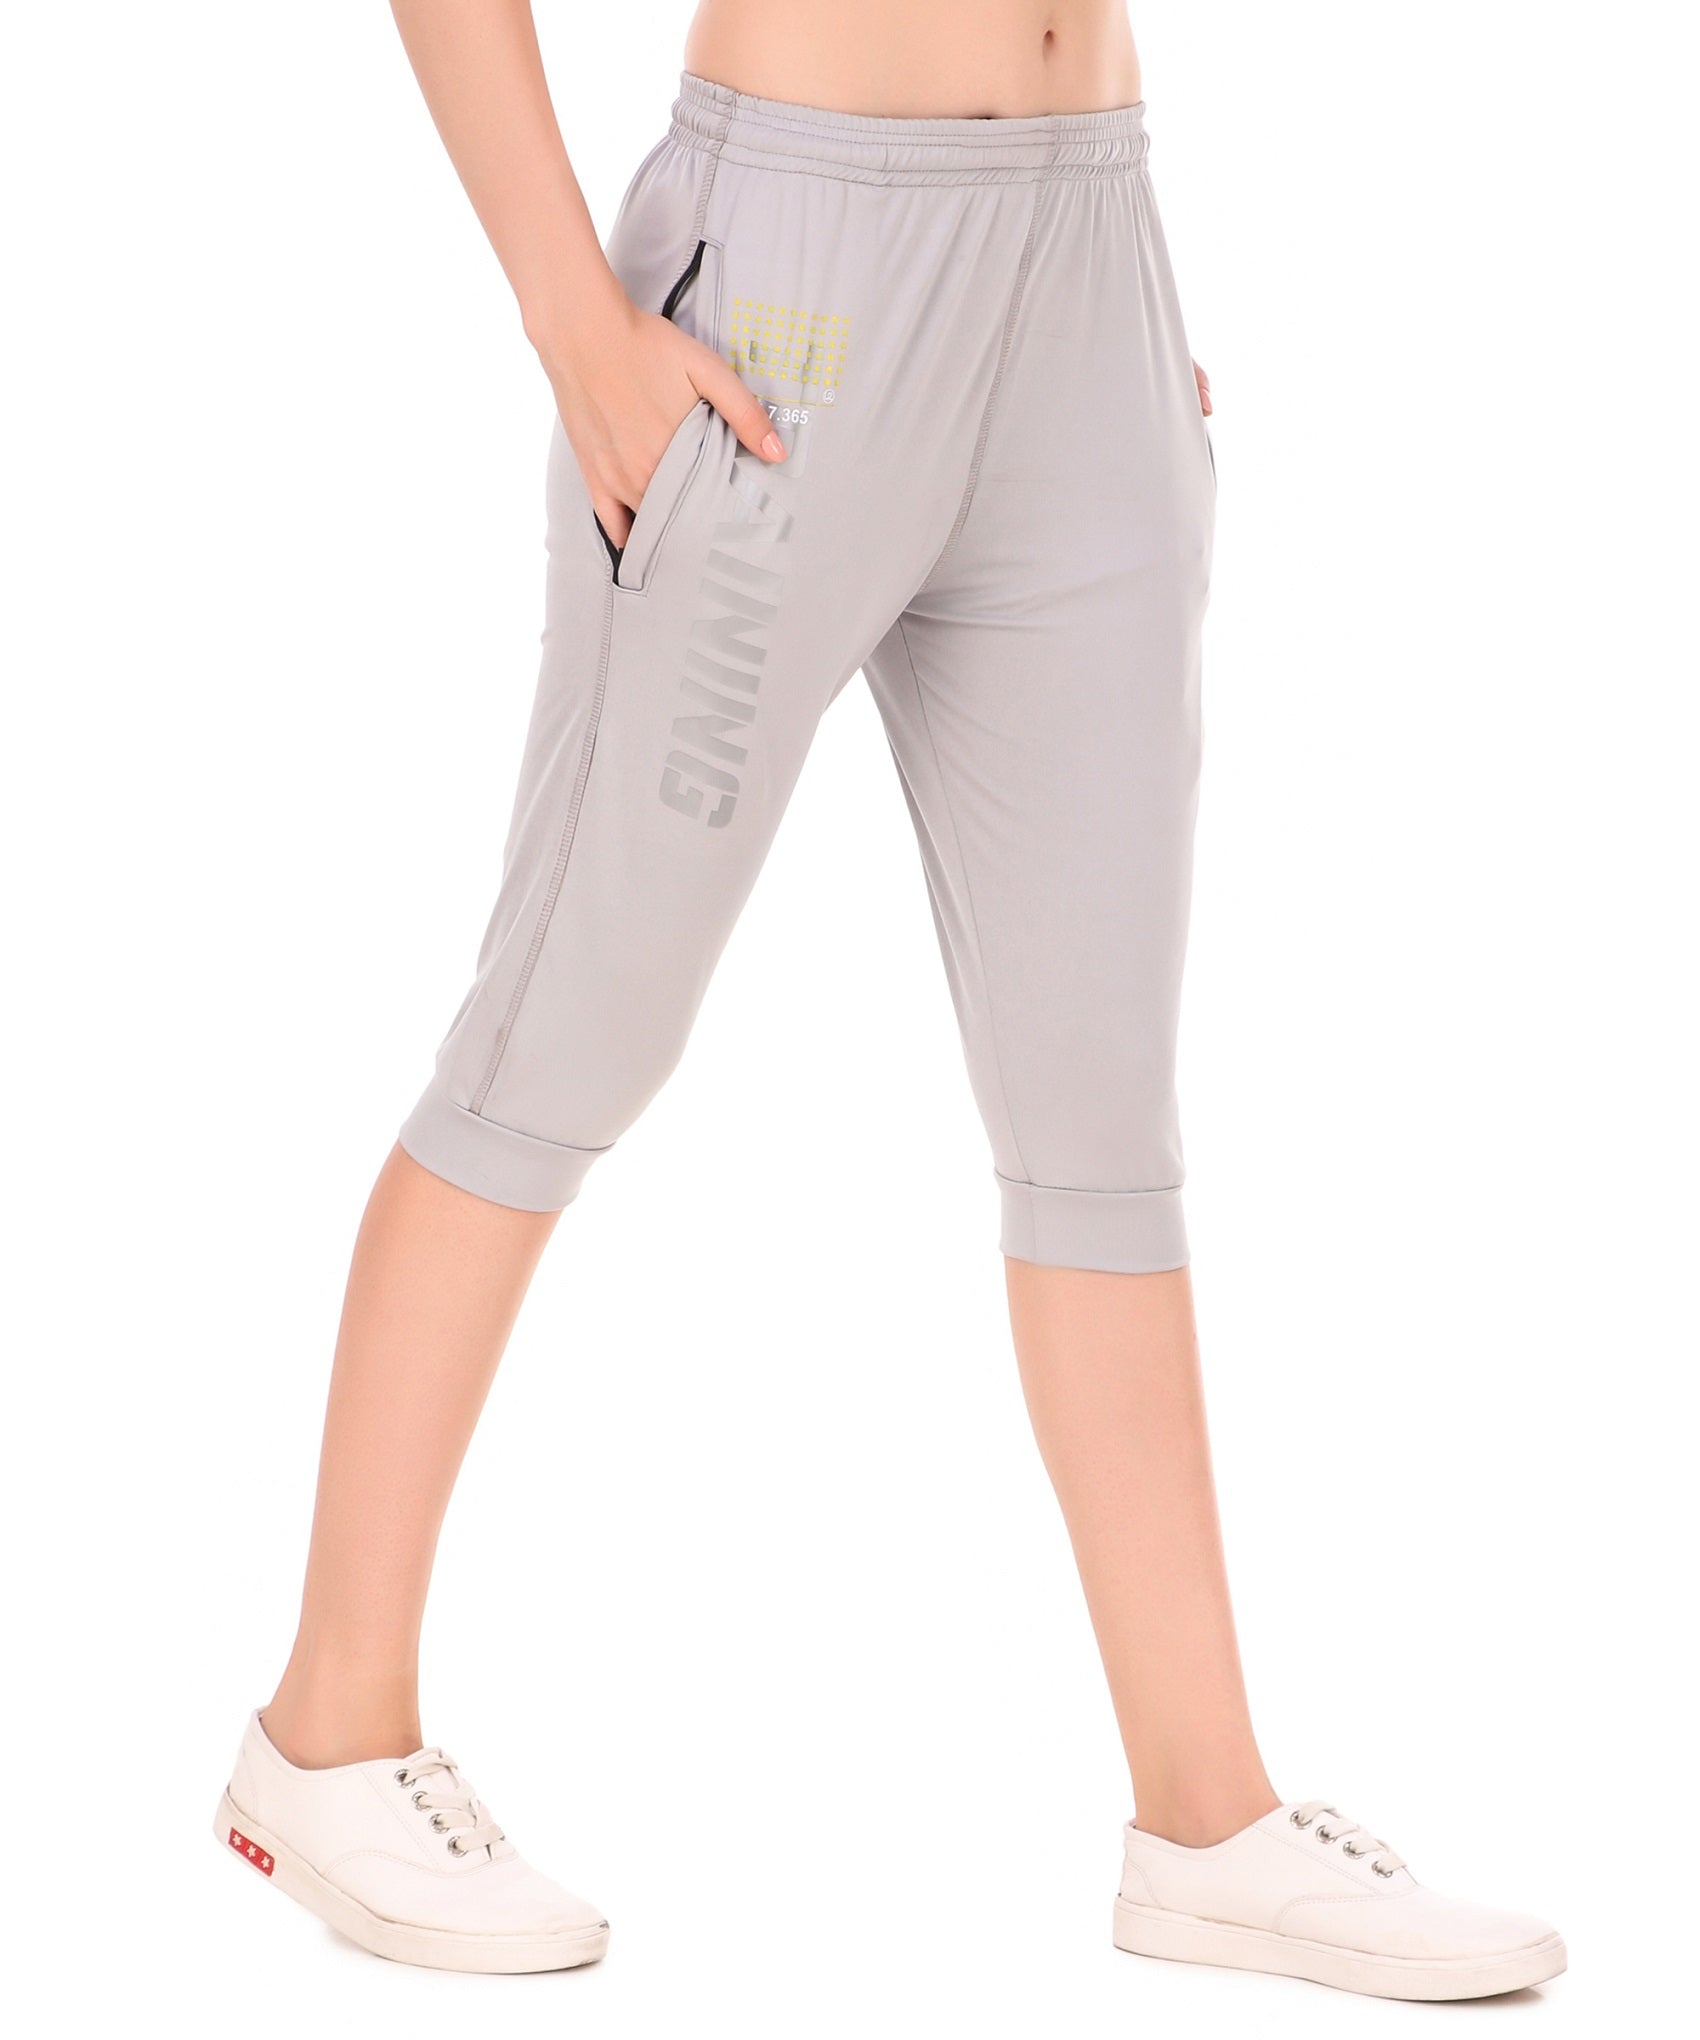 Women's Stretchable Lycra 3/4th Capri with 2 Zippered Pockets for Gym, Yoga, Workout and Casual Wear